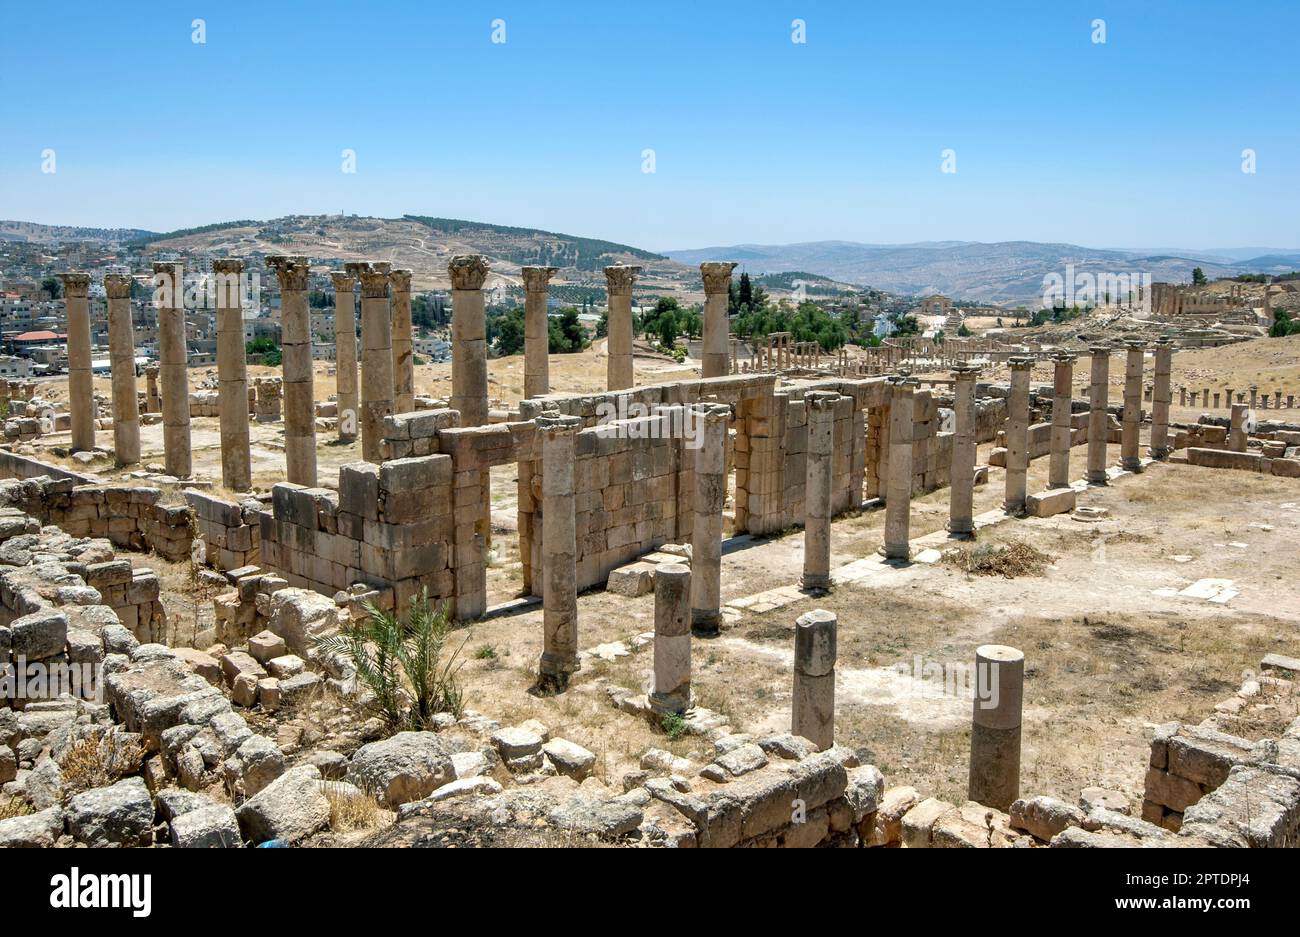 The ruins of the Church of St Theodore at the ancient site of Jerash in Jordan. Stock Photo